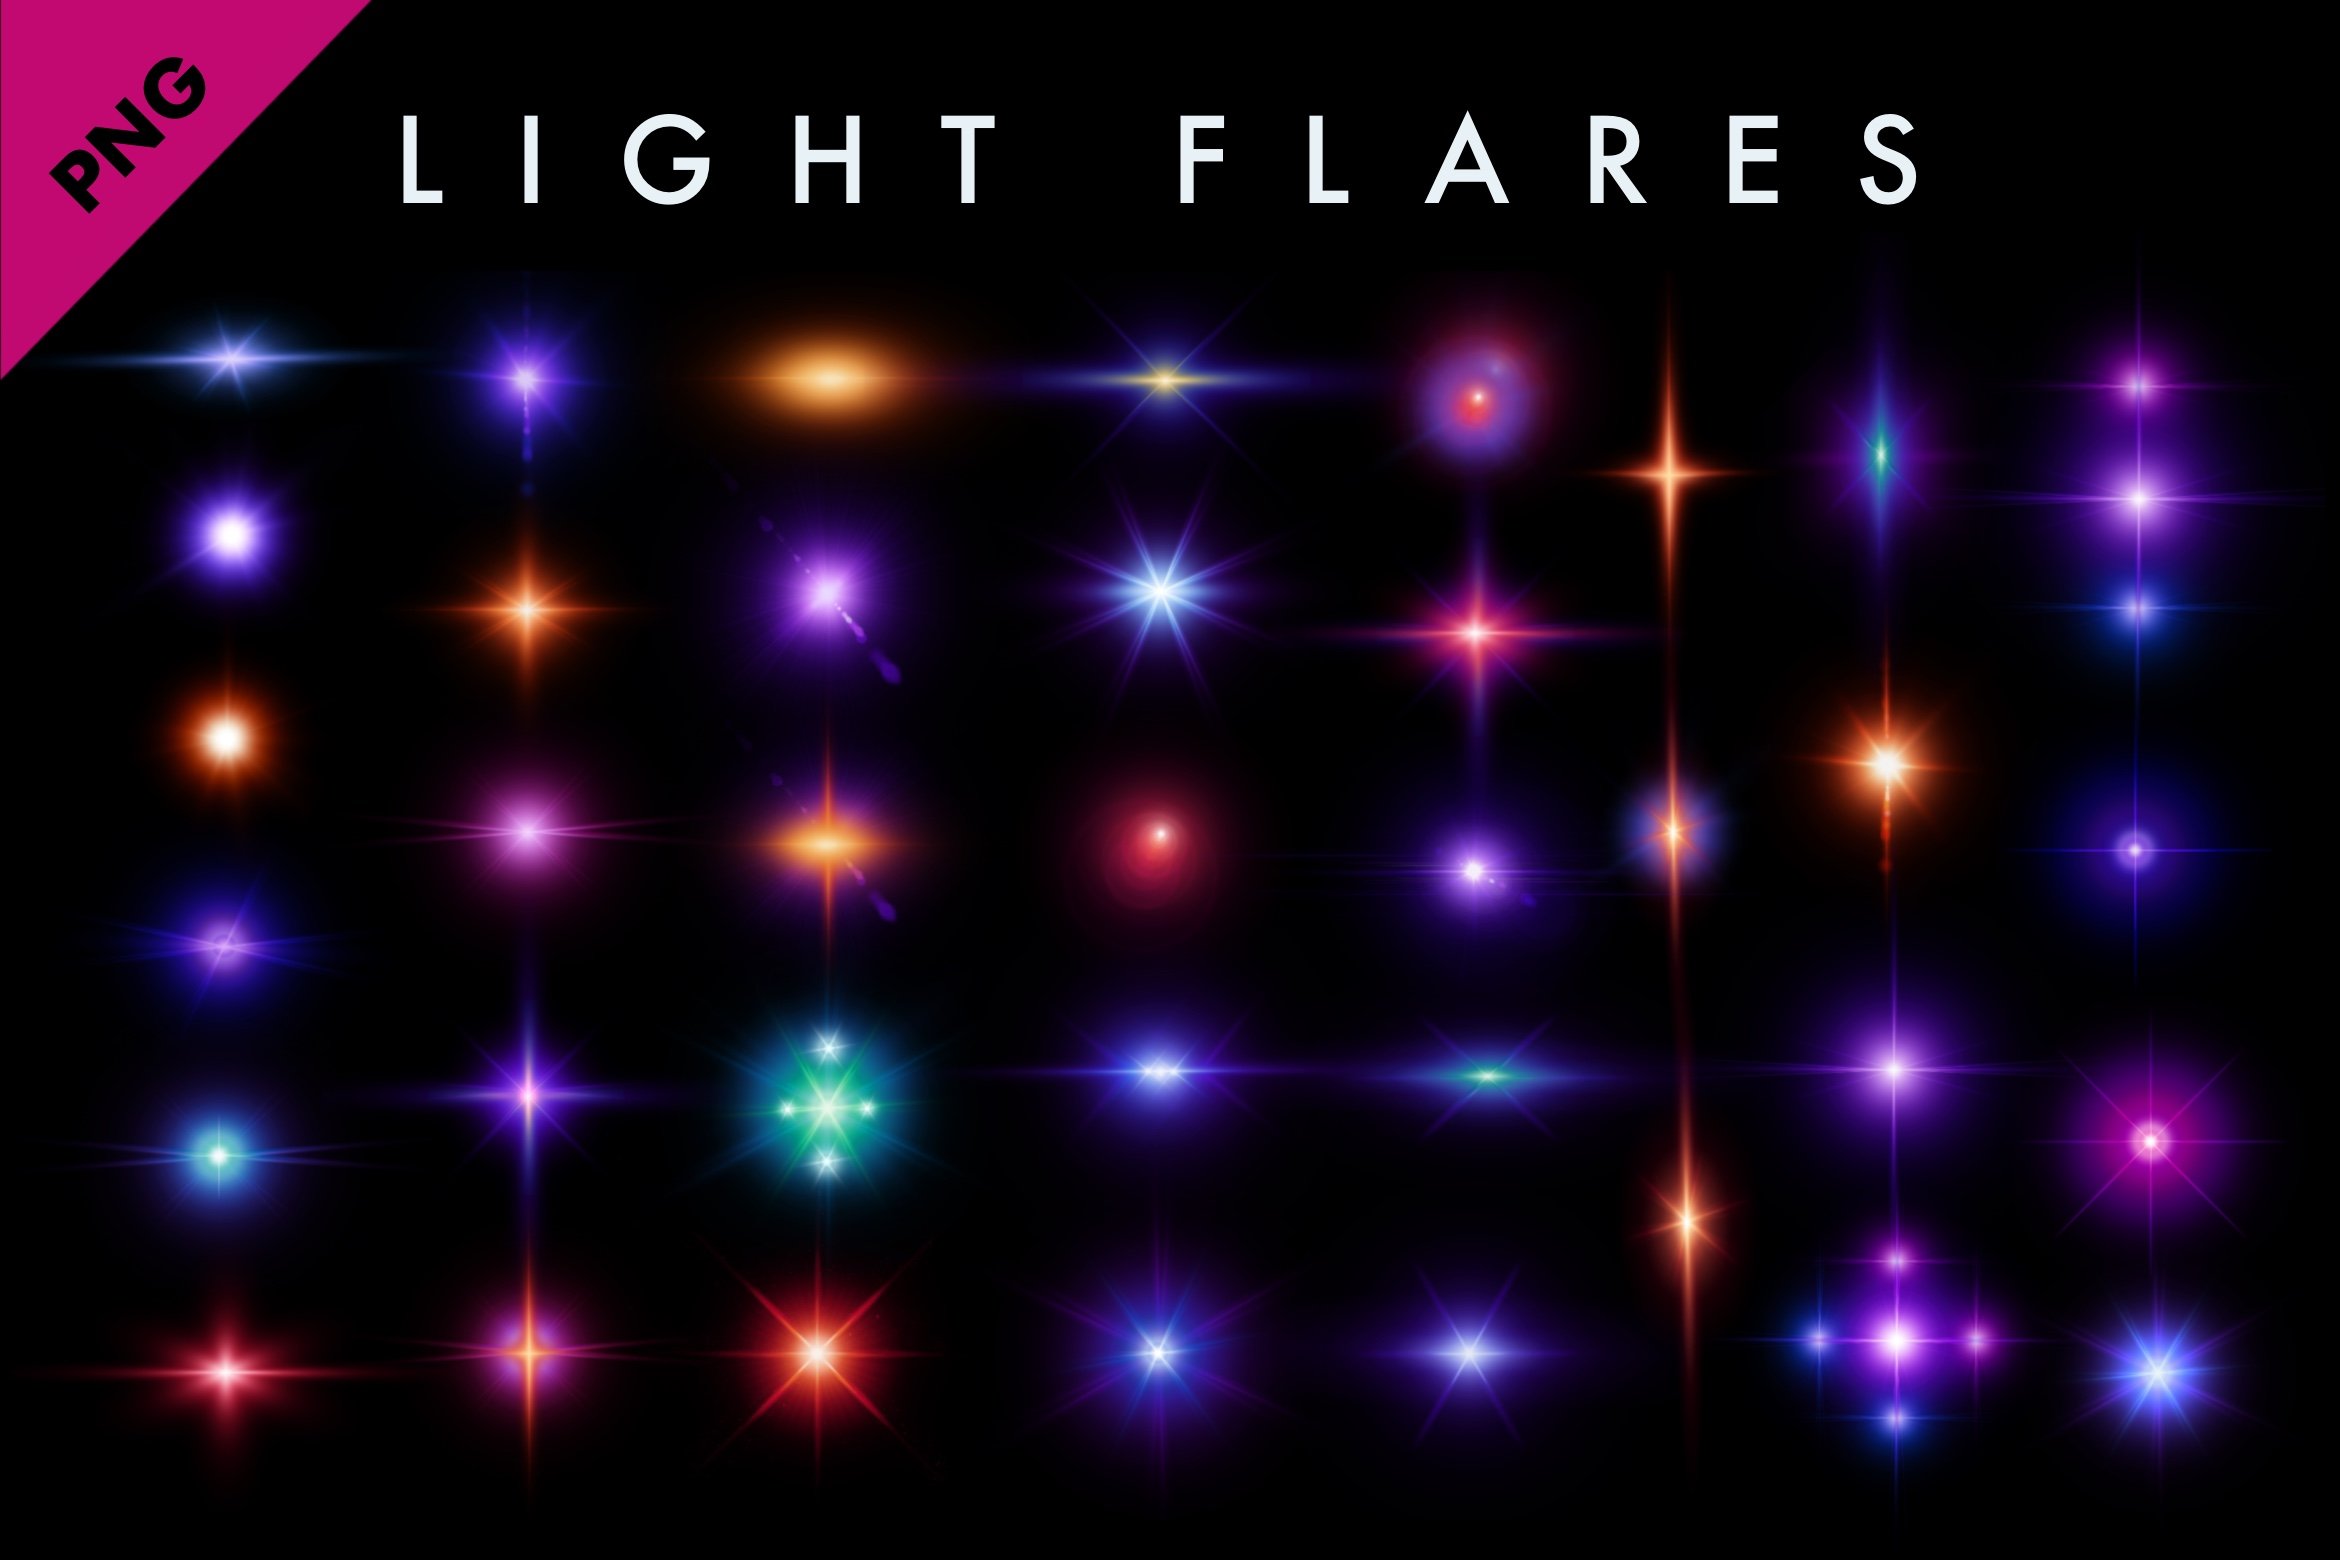 Glowing Light Flare Stars cover image.